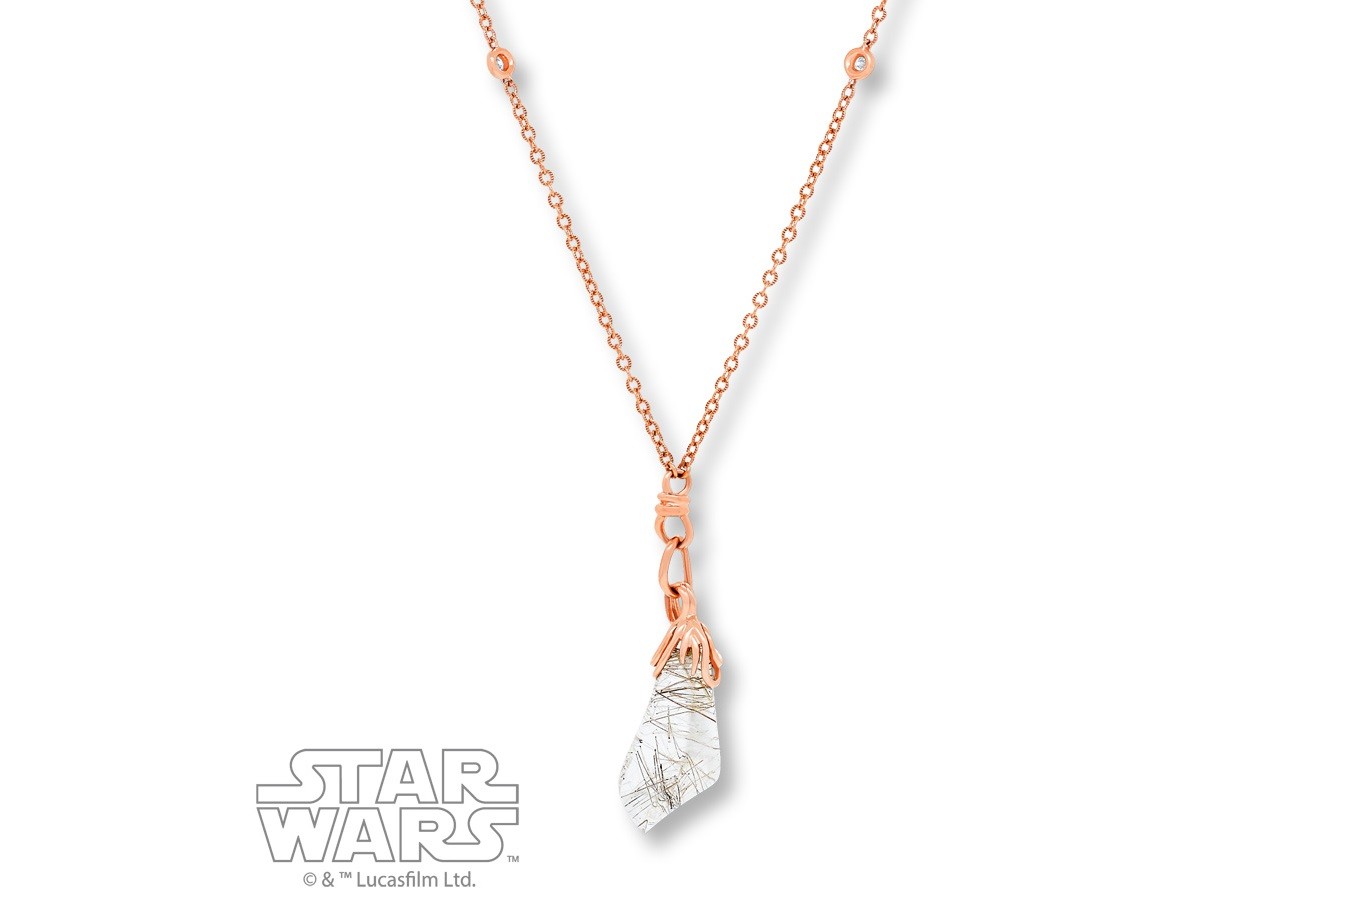 Rogue One Jyn Erso inspired Quartz crystal necklace by Kay Jewelers